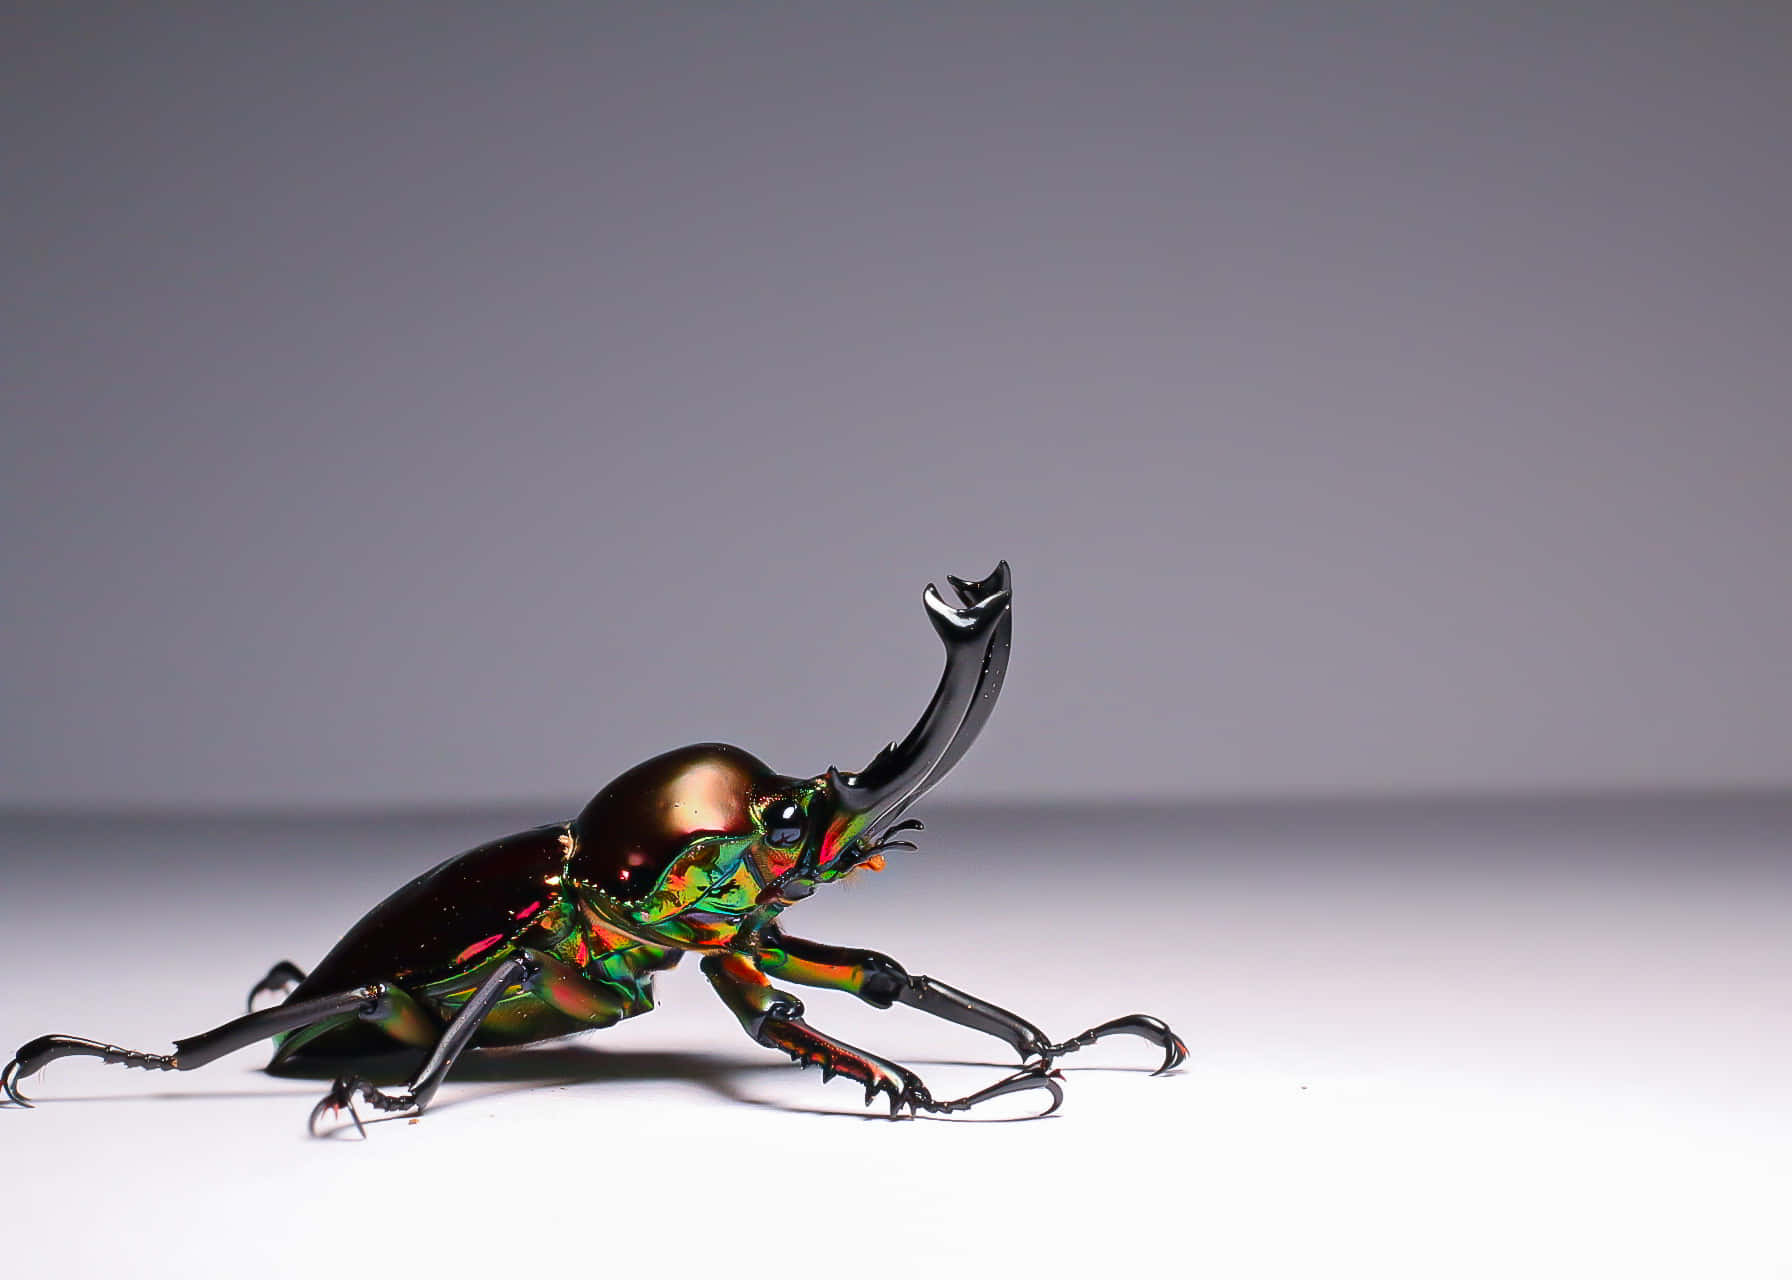 Stag Beetle Profile Wallpaper